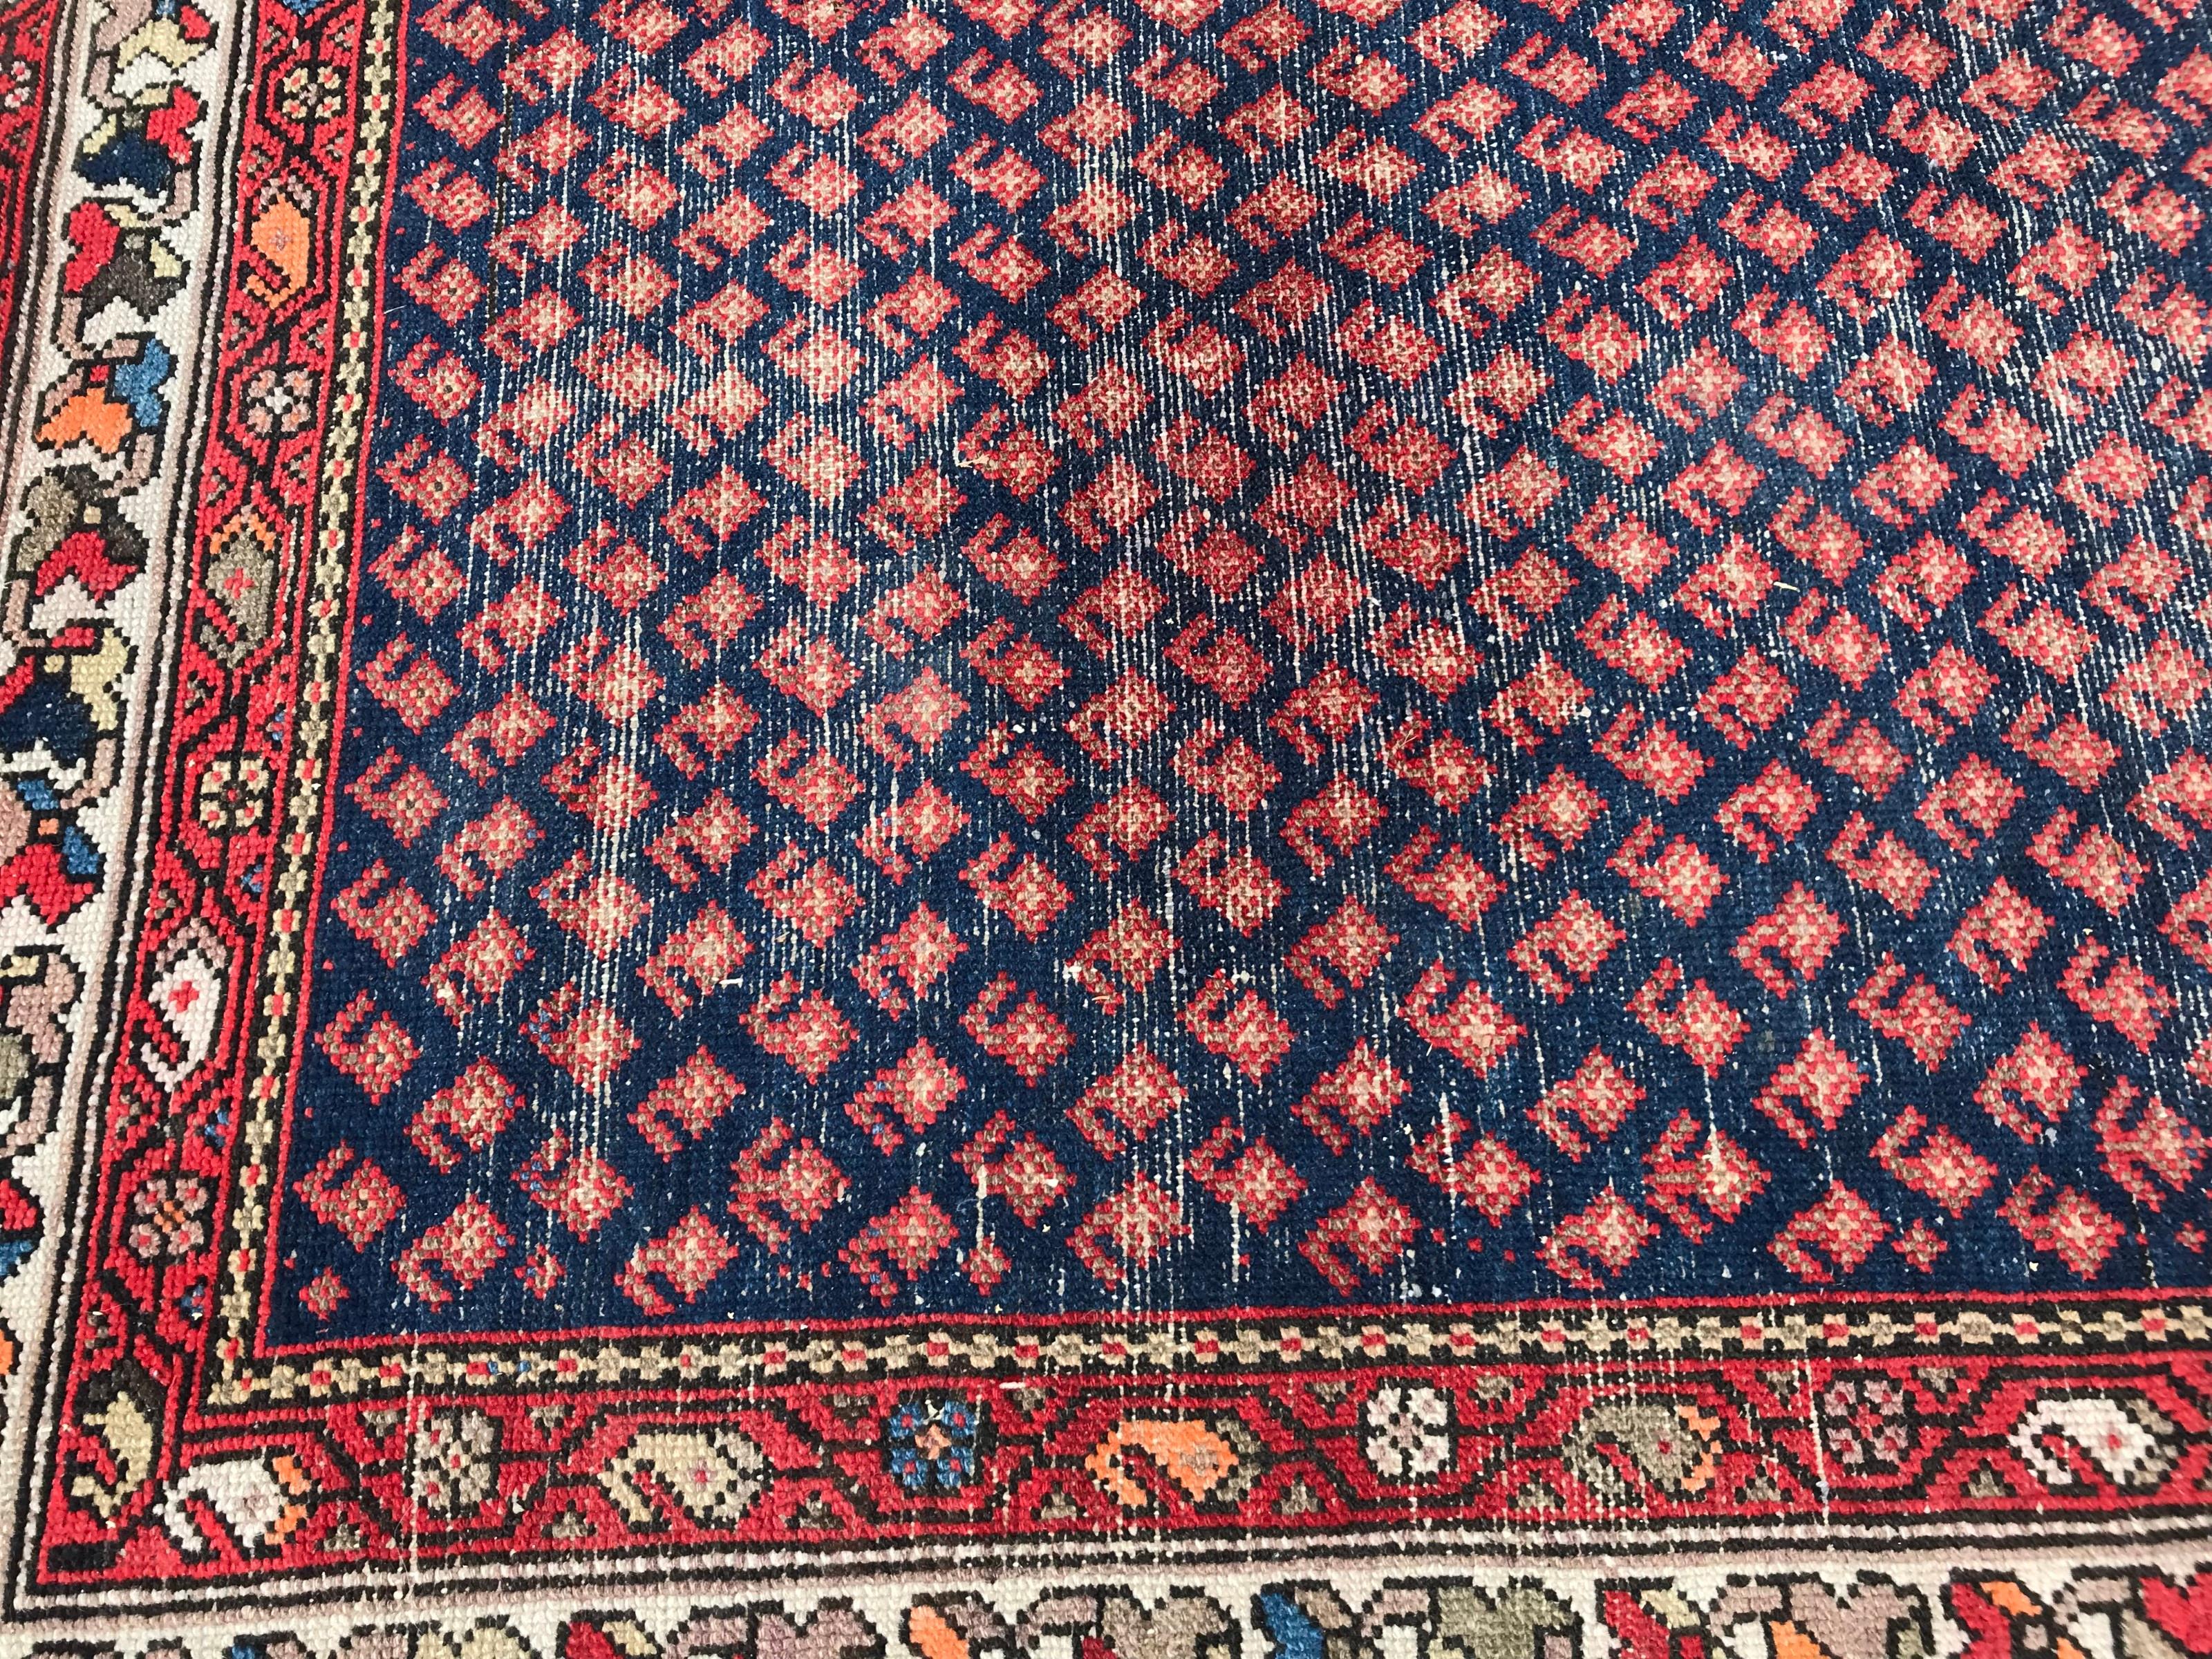 Nice 19th century runner with a decorative Botteh design, and natural colors with blue and red, entirely hand knotted with wool velvet on cotton foundations. Measures: 3ft 5in x 12ft 9in.